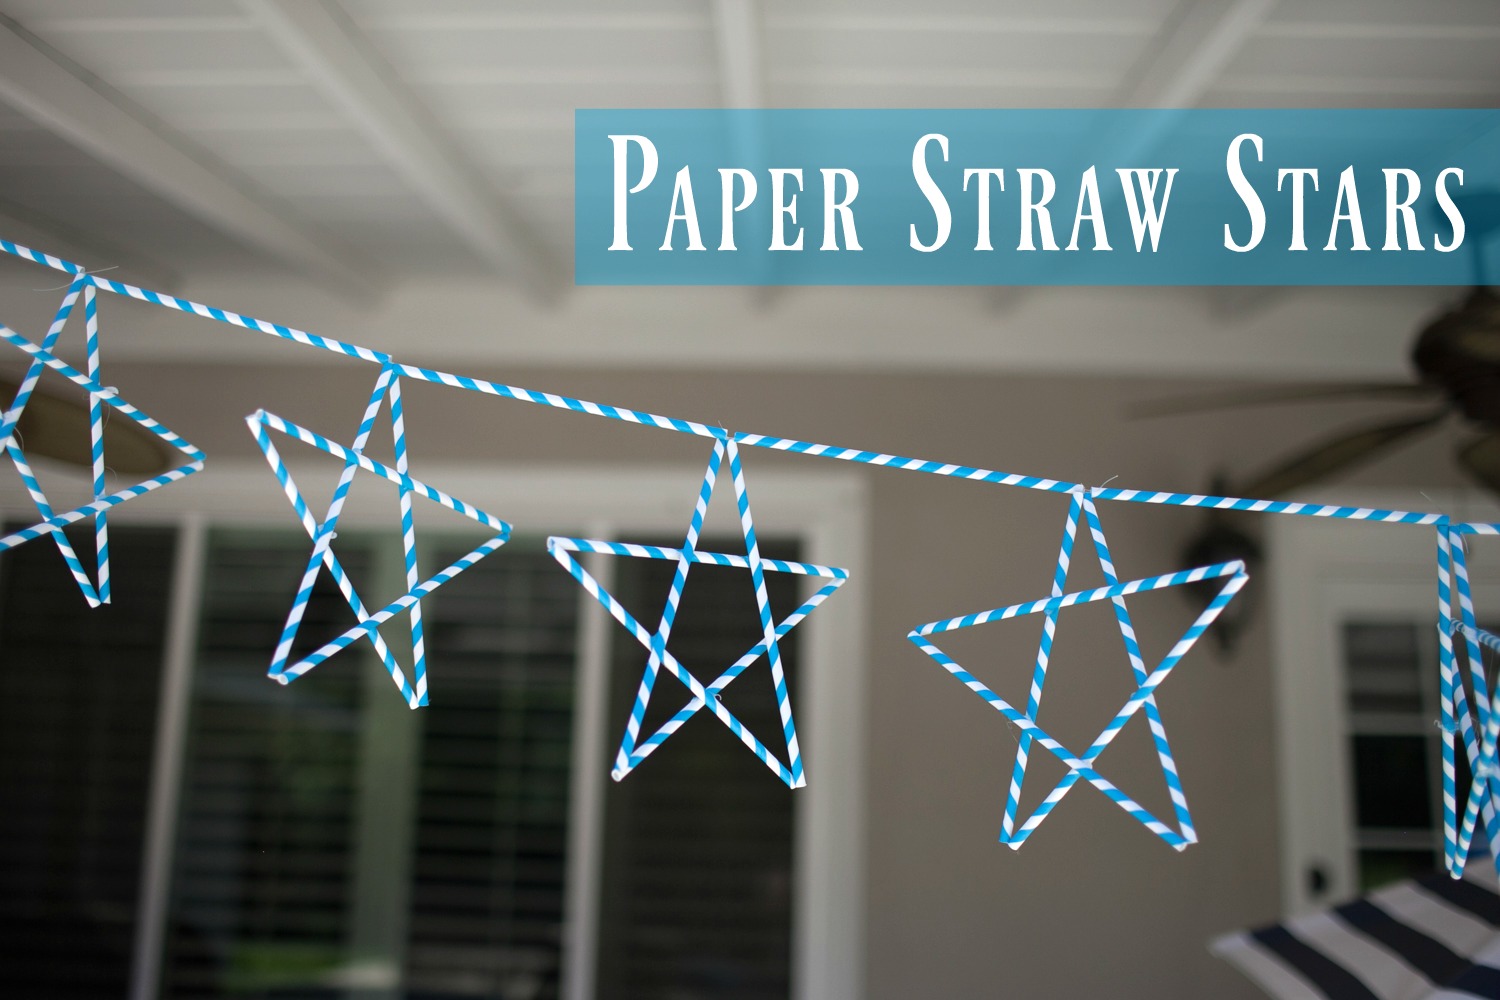 Perfect party decorations any time of the year — paper straw stars! Mix and match colors and patterns to match any decor. String them together to make a banner, or to make a full photo backdrop. Easy step by step instructions and a video tutorial will help you create the perfect stars.